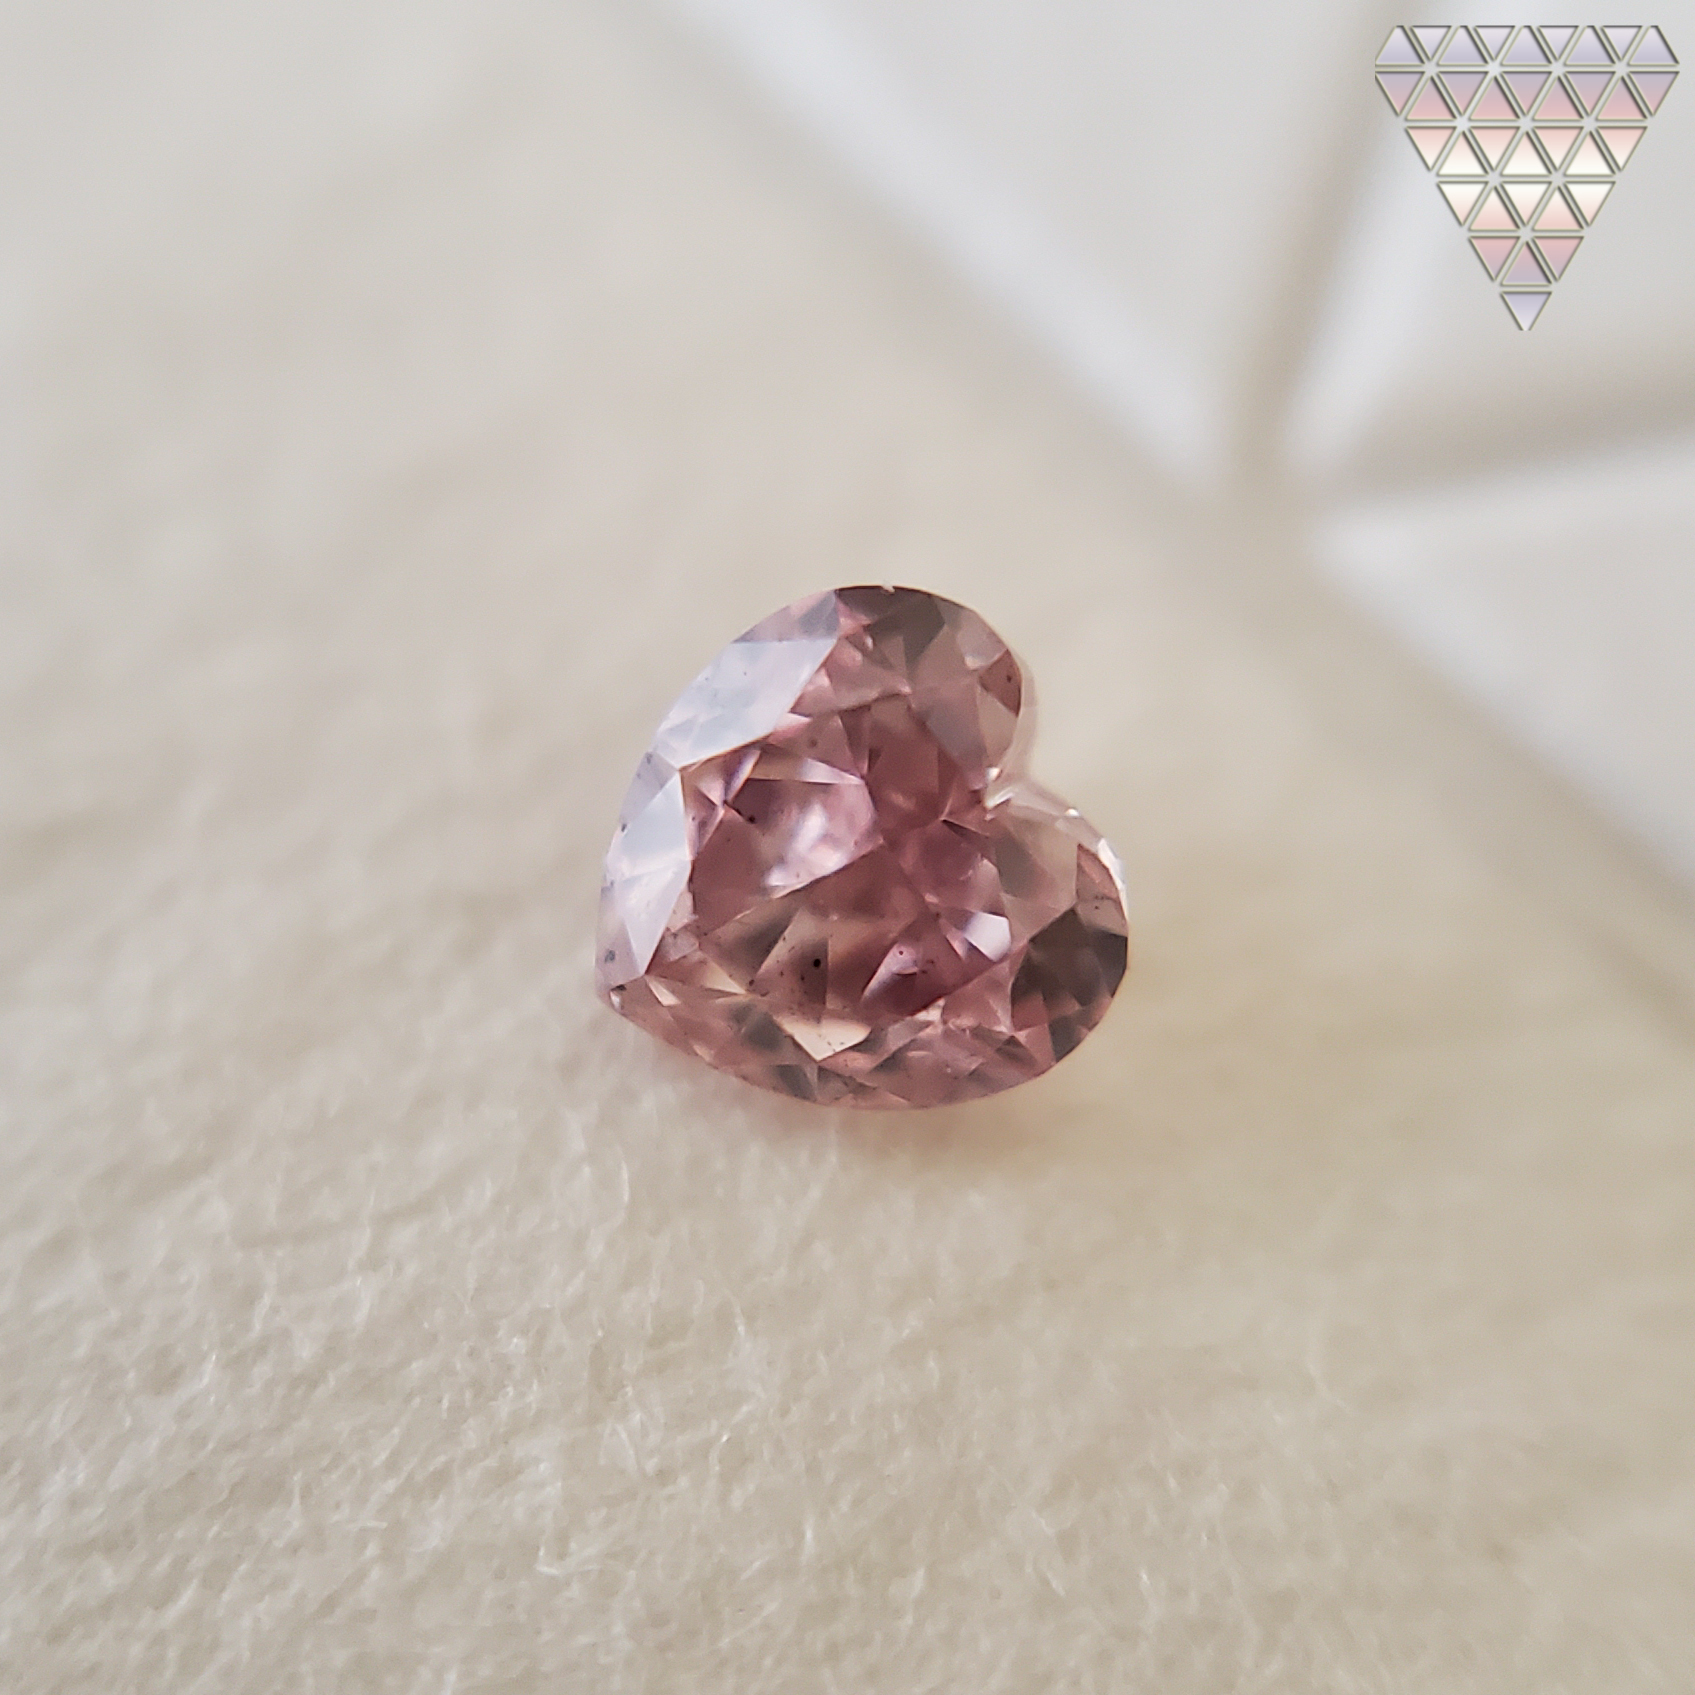 0.093 Ct Fancy Pink Si1 Heart AGT Japan Natural Loose Diamond Exchange Federation 3